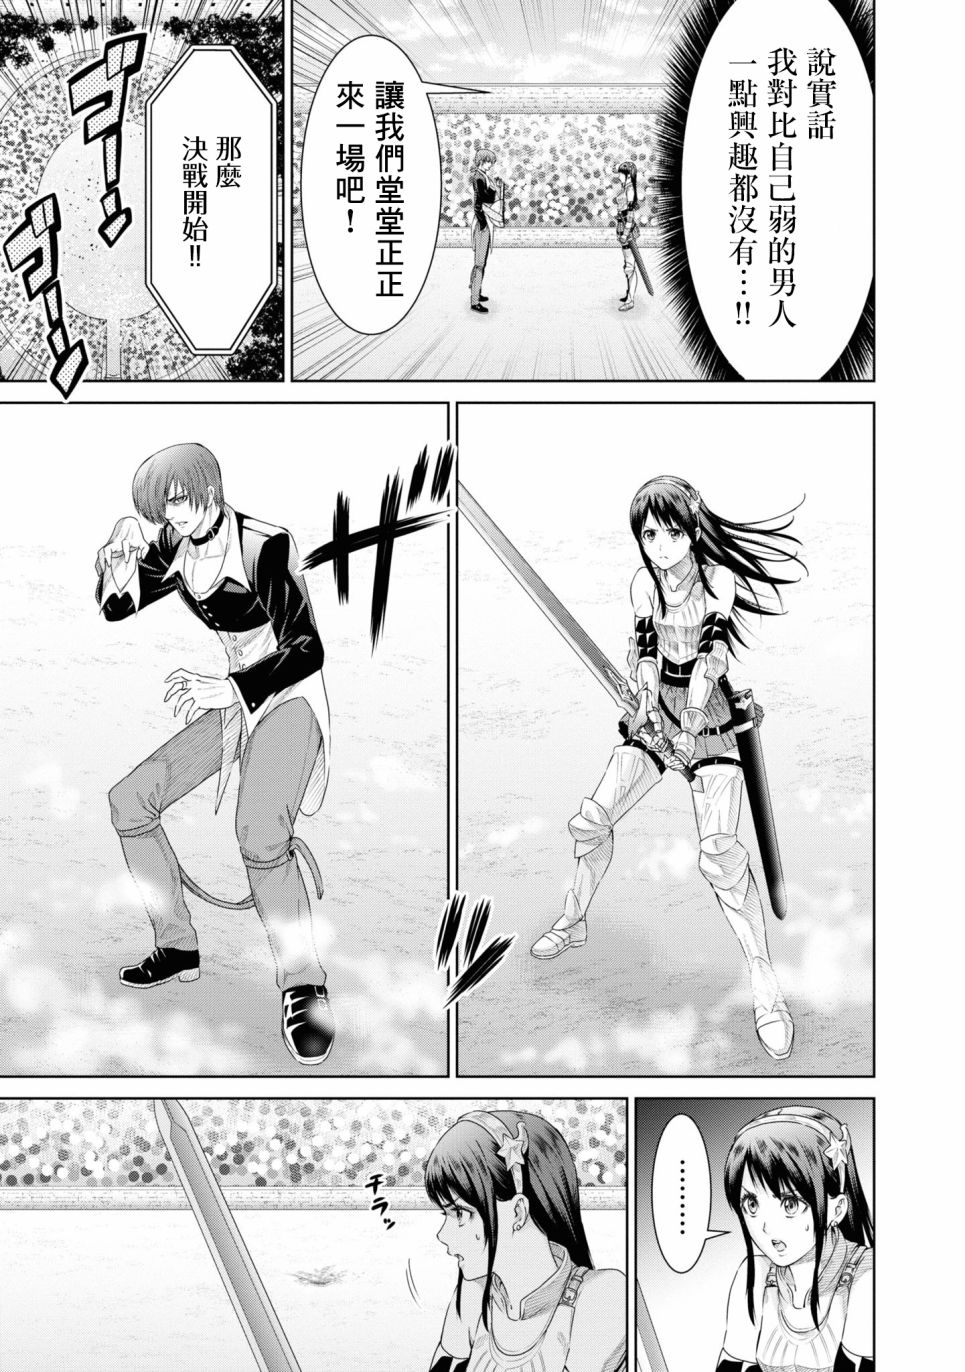 《THE KING OF FANTASY 八神庵的异世界无双》漫画 八神庵的异世界无双 005集